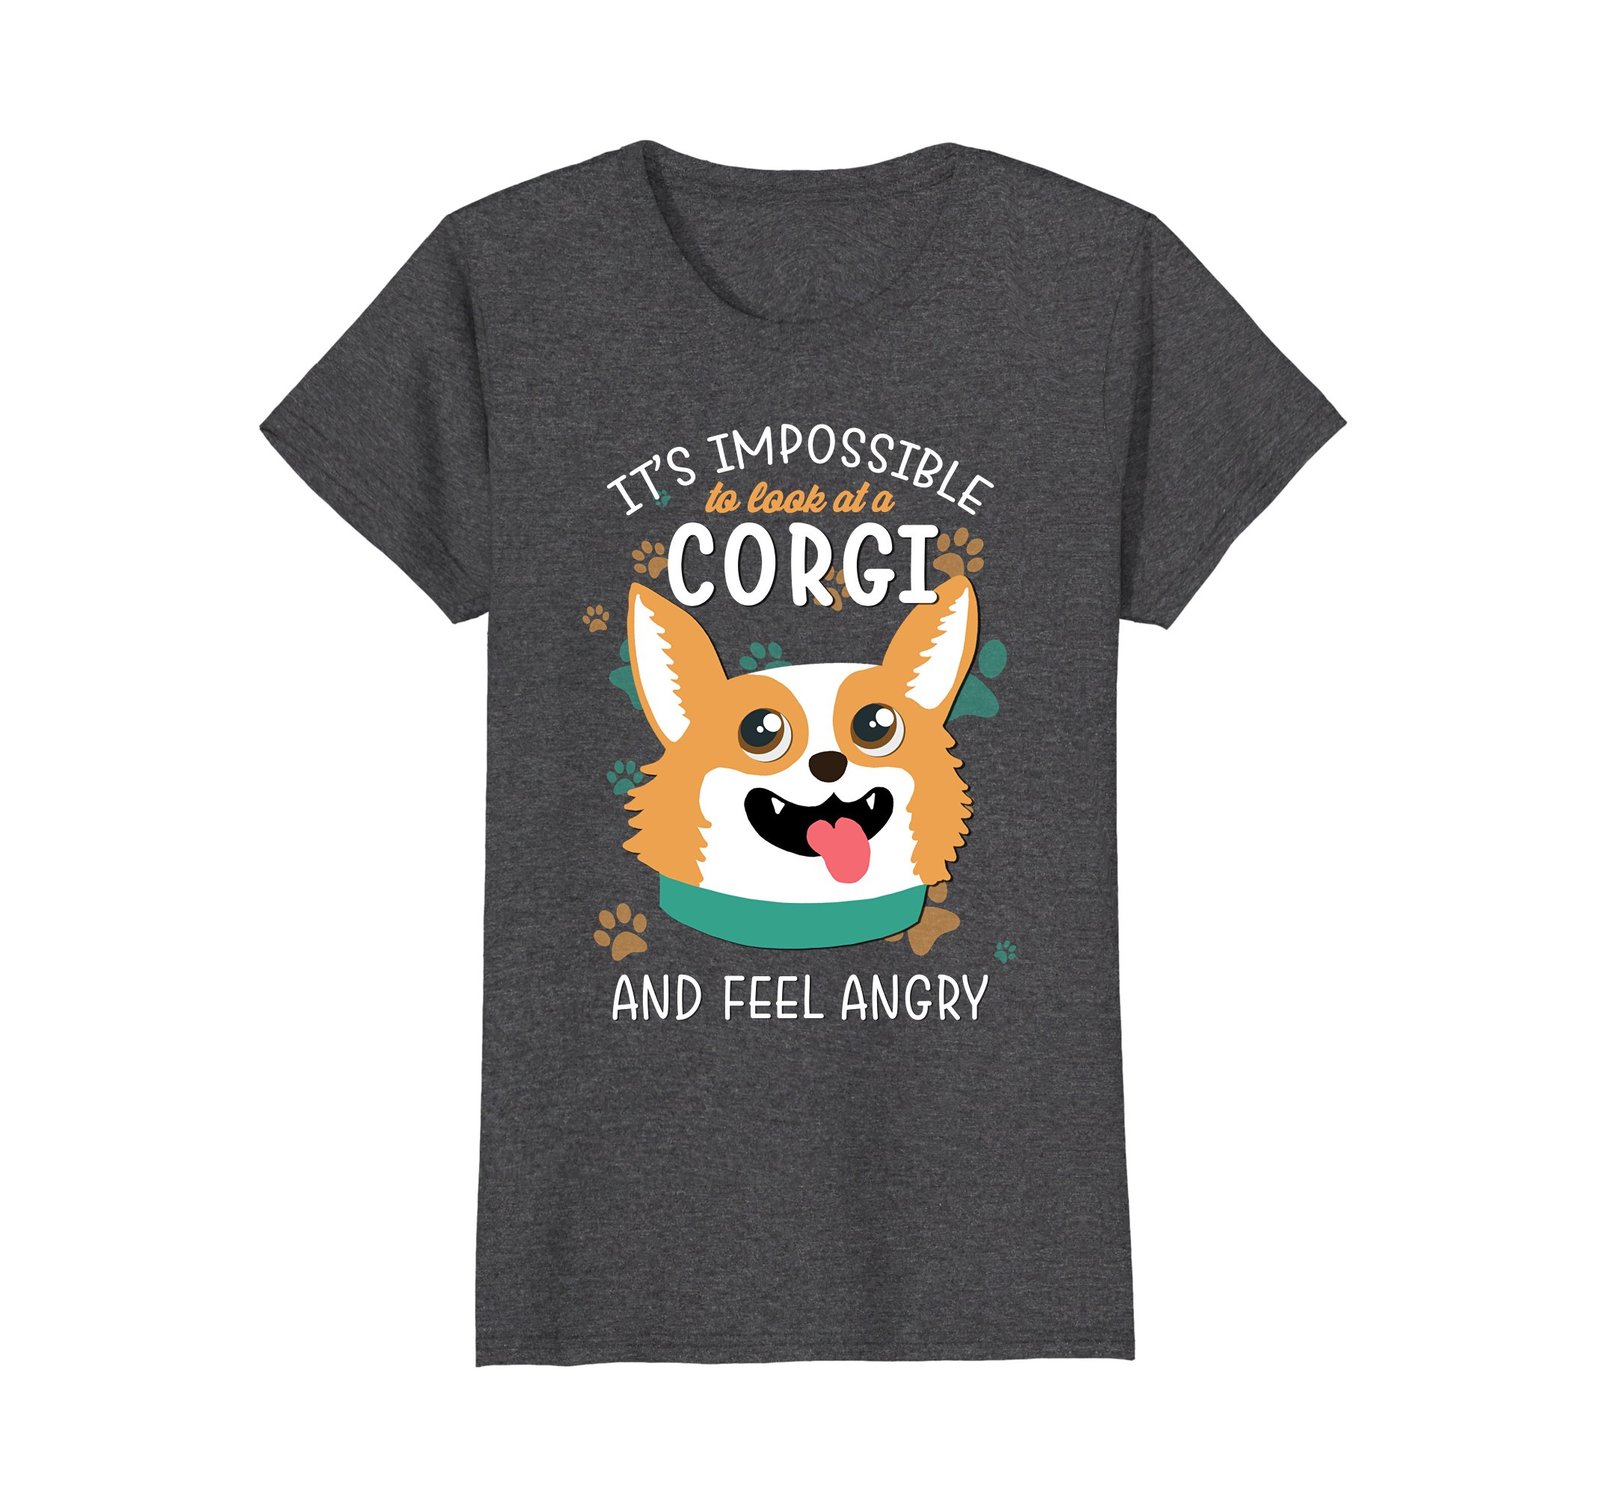 Cool Pembroke Gift Lover Impossible To Feel Angry With Corgi - $19.99 - $20.99